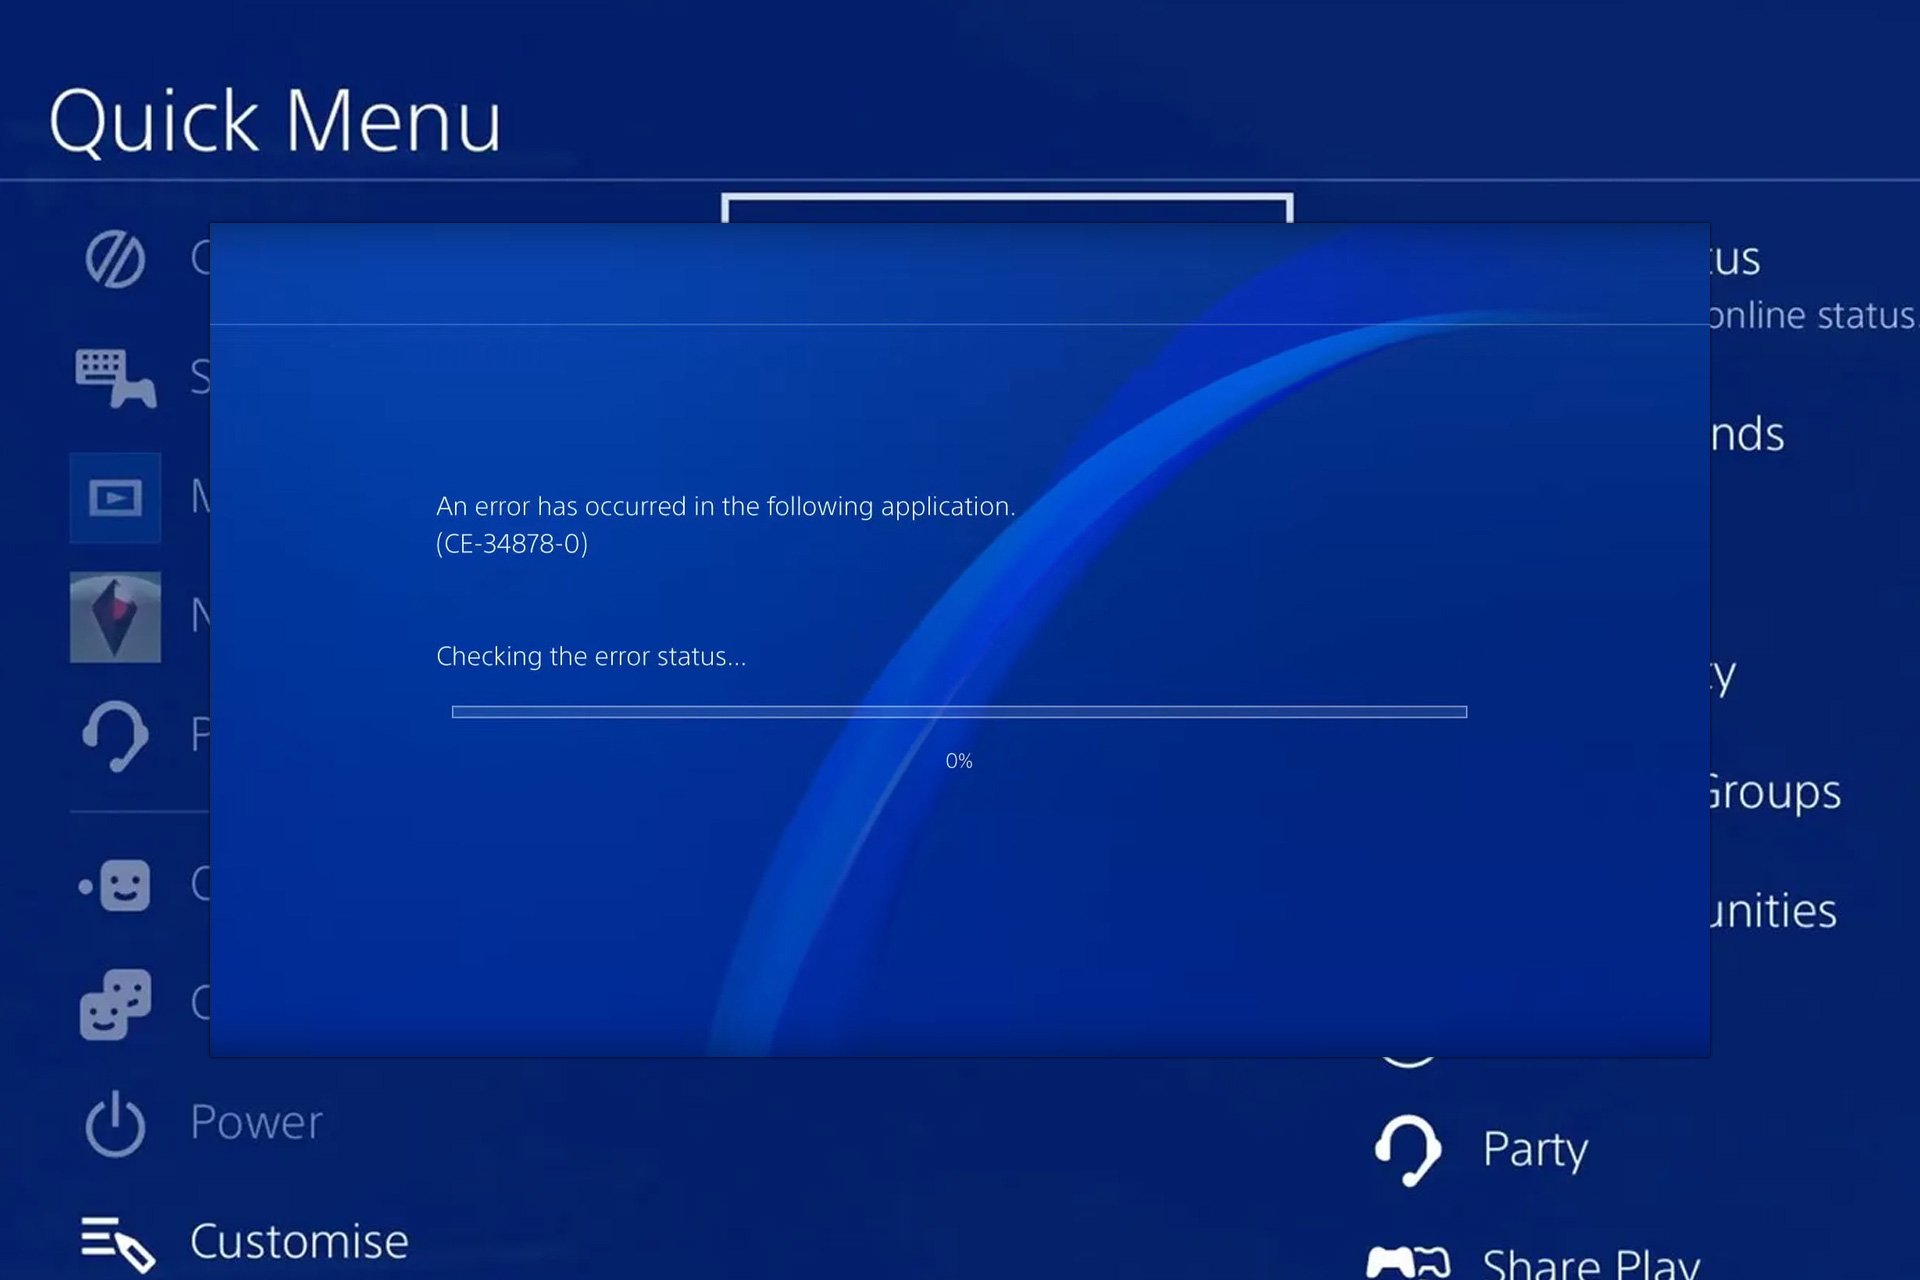 mund Bil Selvrespekt An Error Has Occurred on PS4 [Network Sign In Fix]